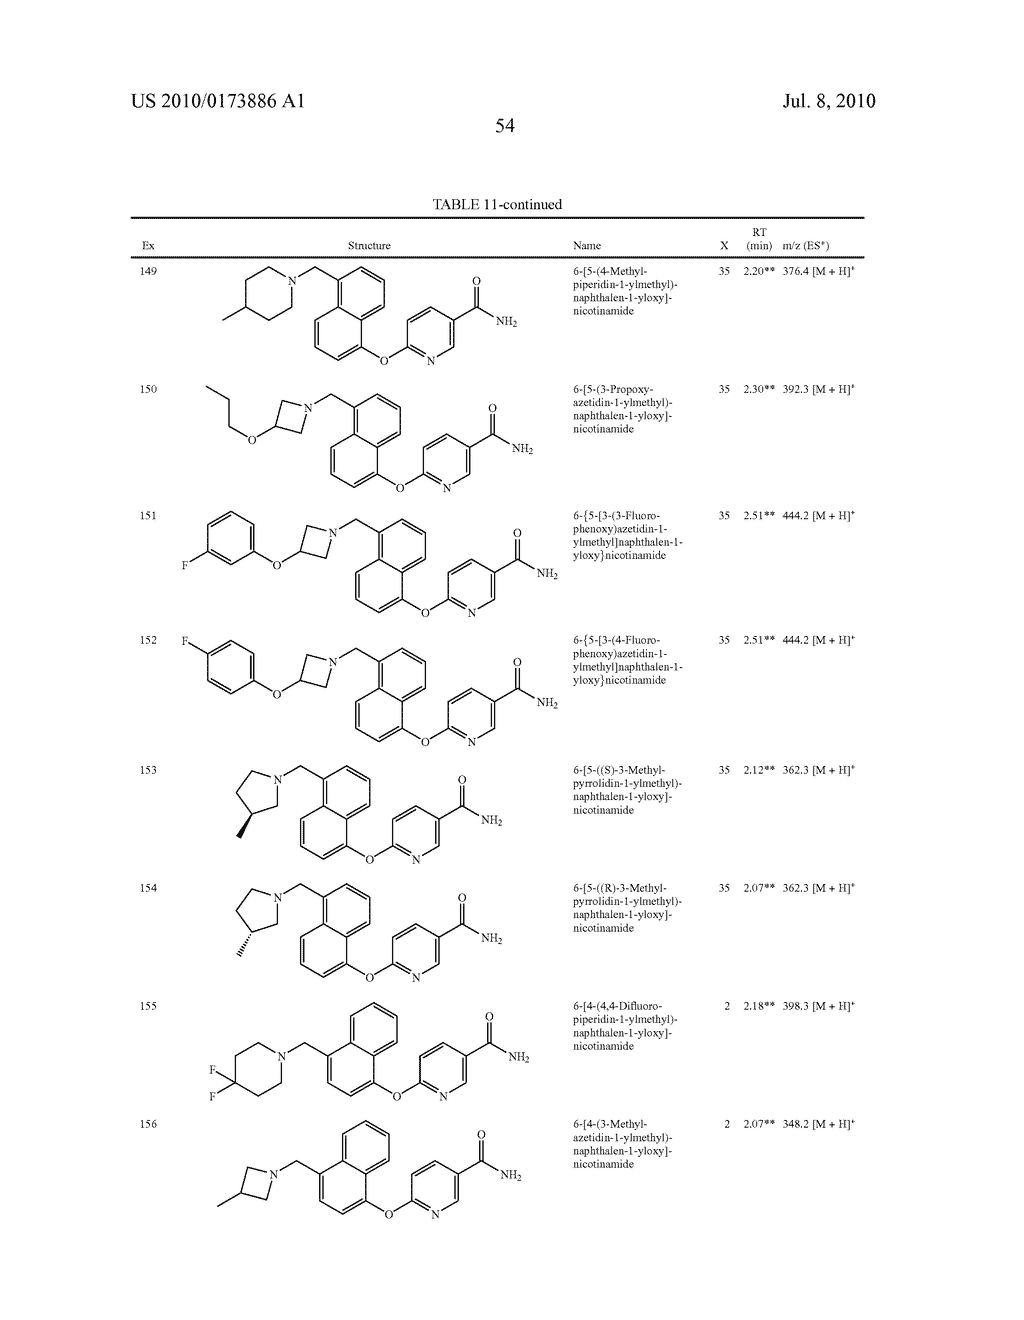 BICYCLIC ARYL AND HETEROARYL COMPOUNDS FOR THE TREATMENT OF METABOLIC DISORDERS - diagram, schematic, and image 55